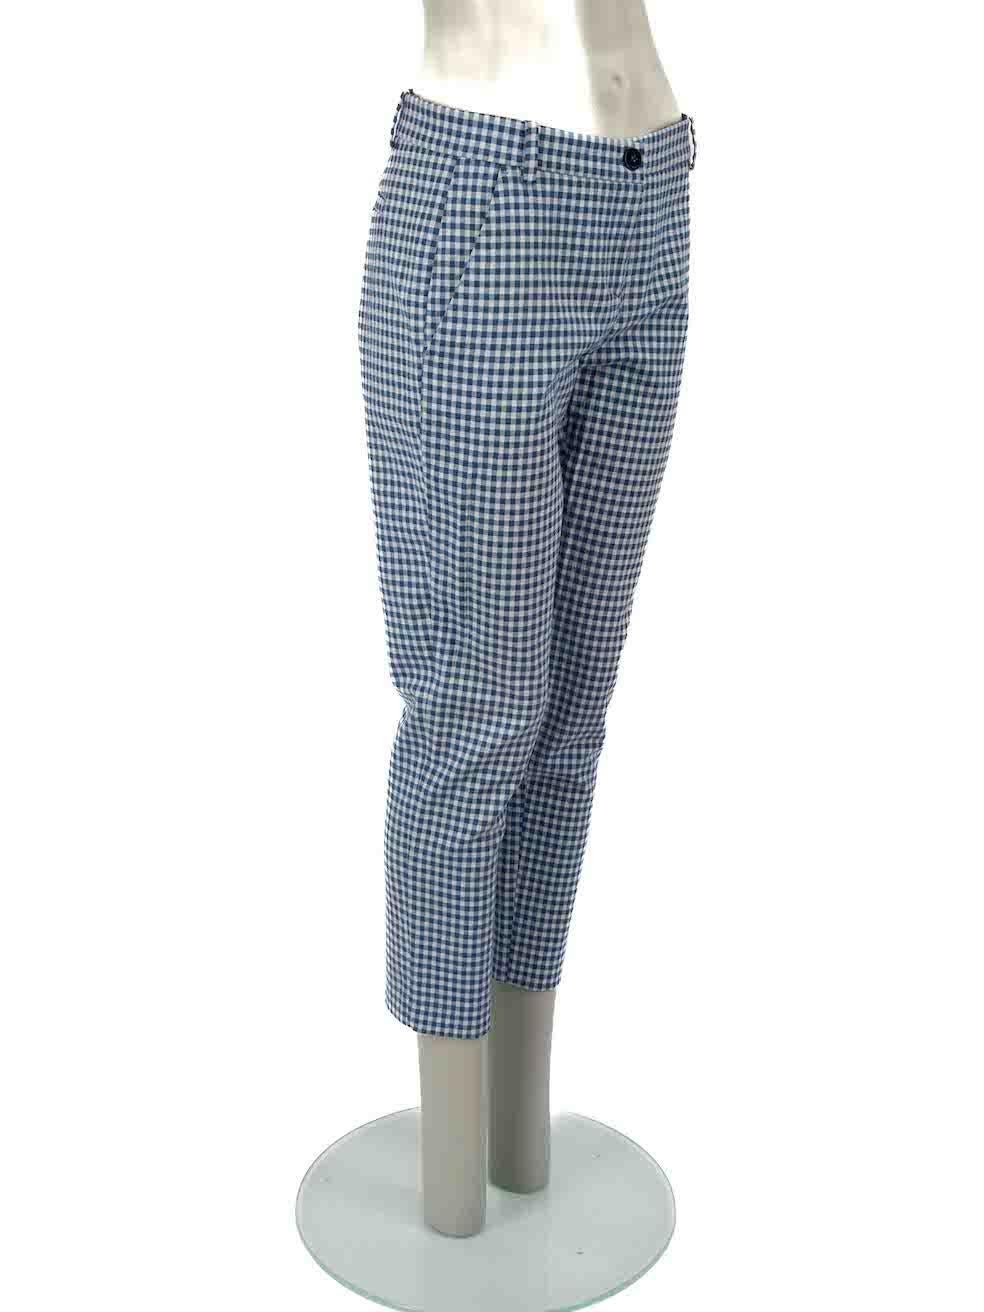 CONDITION is Very good. Hardly any visible wear to trousers is evident on this used Pinko designer resale item.
 
Details
Blue
Cotton
Trousers
Slim fit
Cropped
Gingham pattern
2x Side pockets
2x Back pockets
Fly zip and button fastening
 
Made in